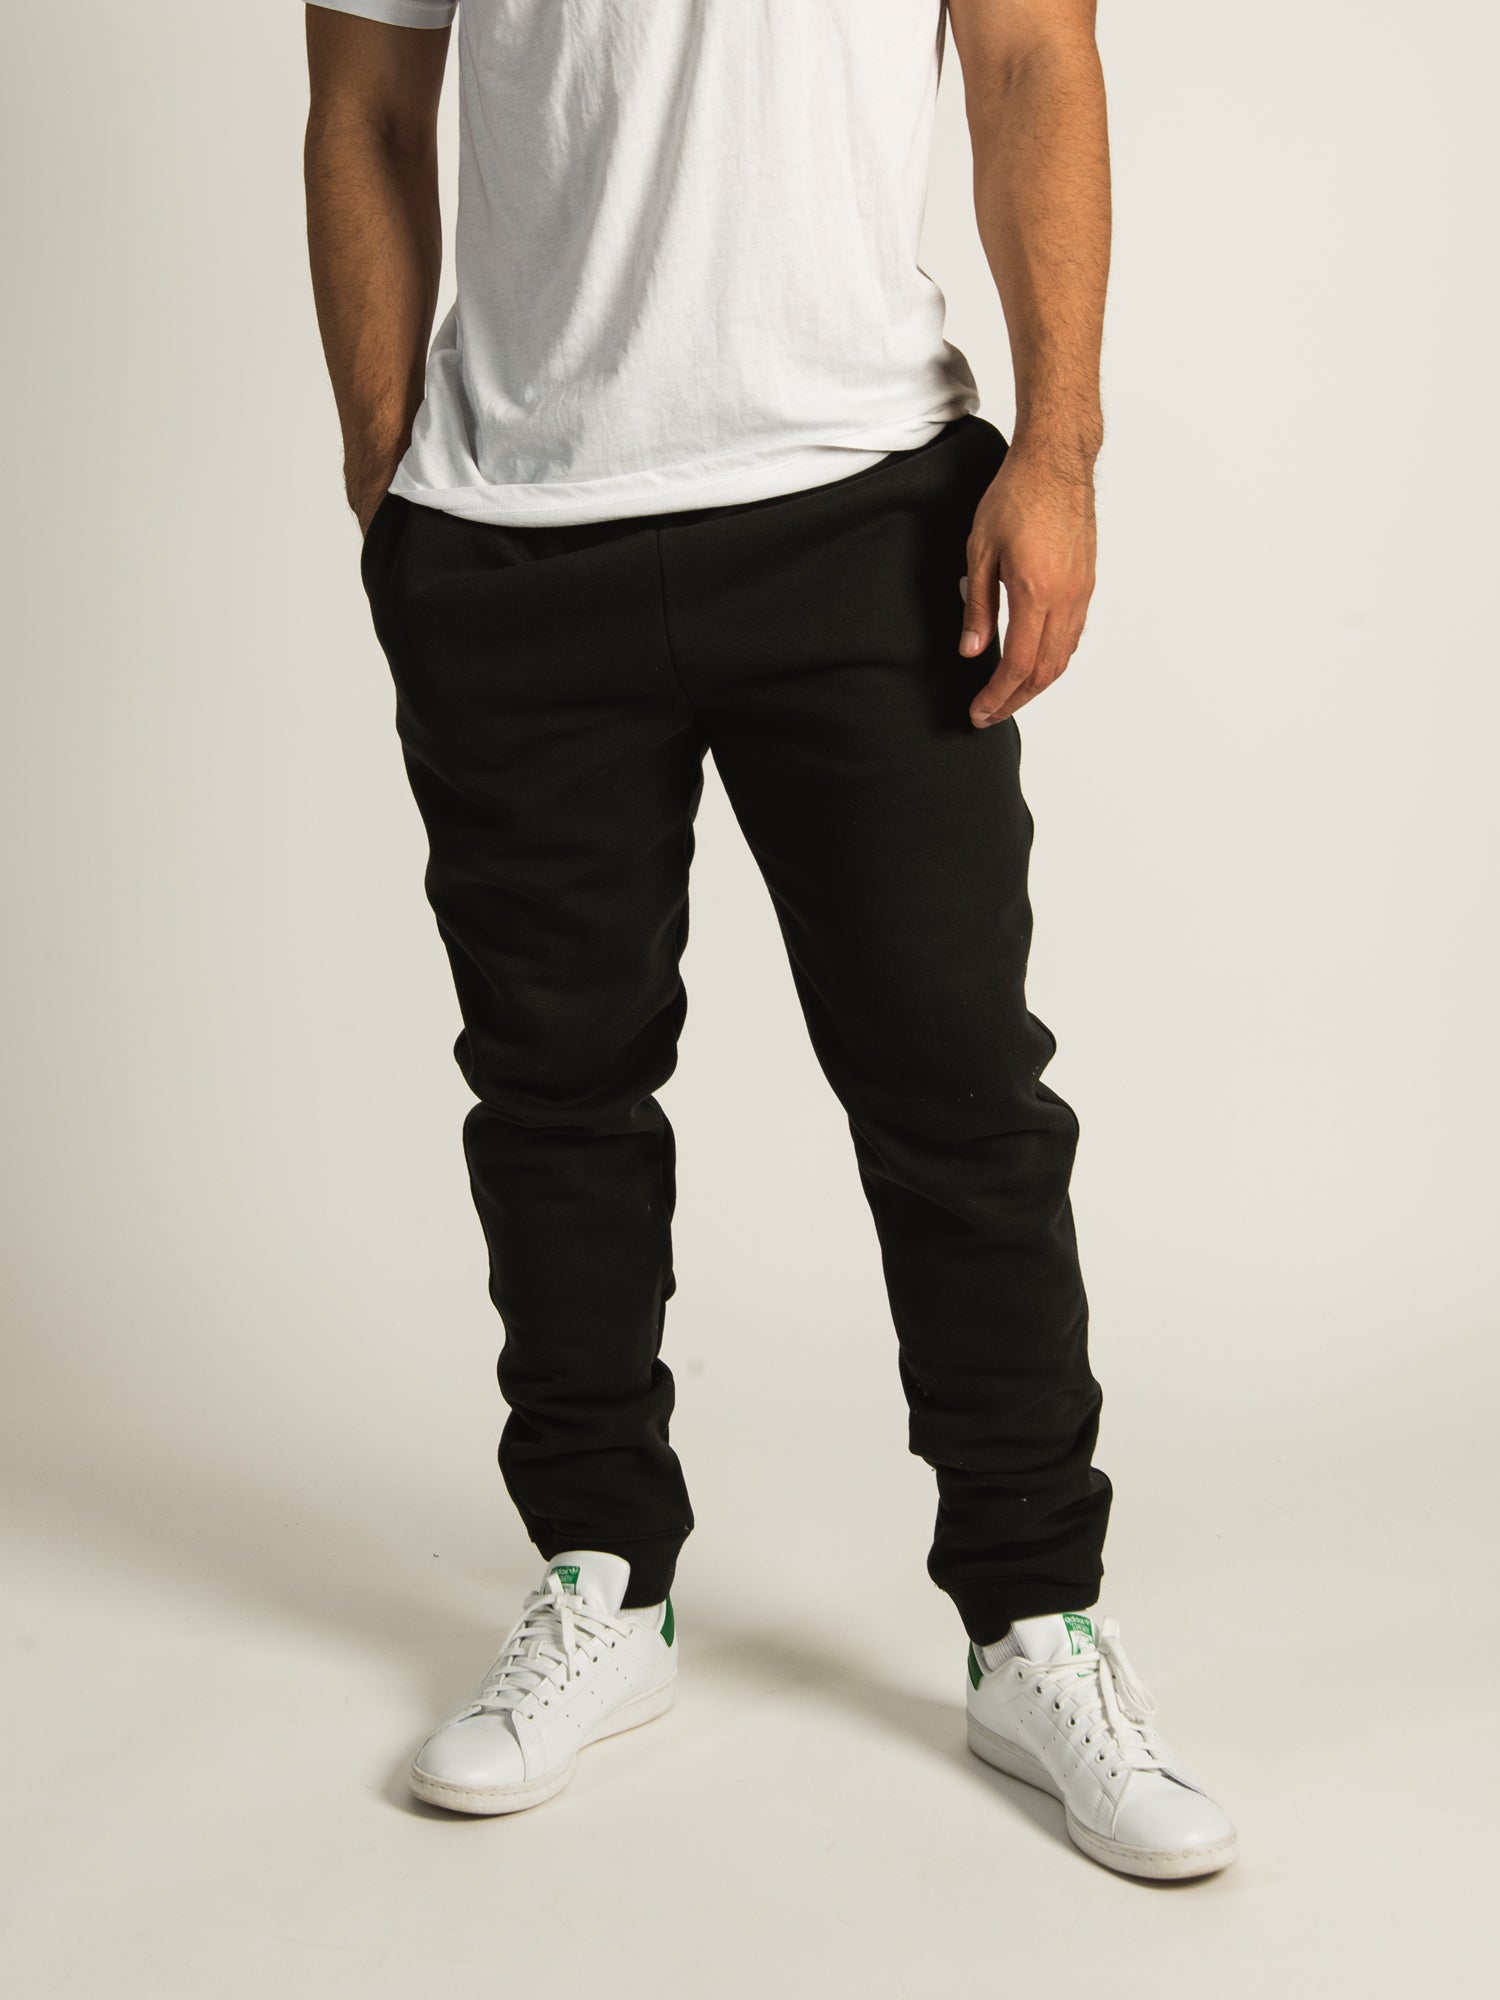 TENTREE FRENCH TERRY WIDELEG SWEATPANTS - CLEARANCE